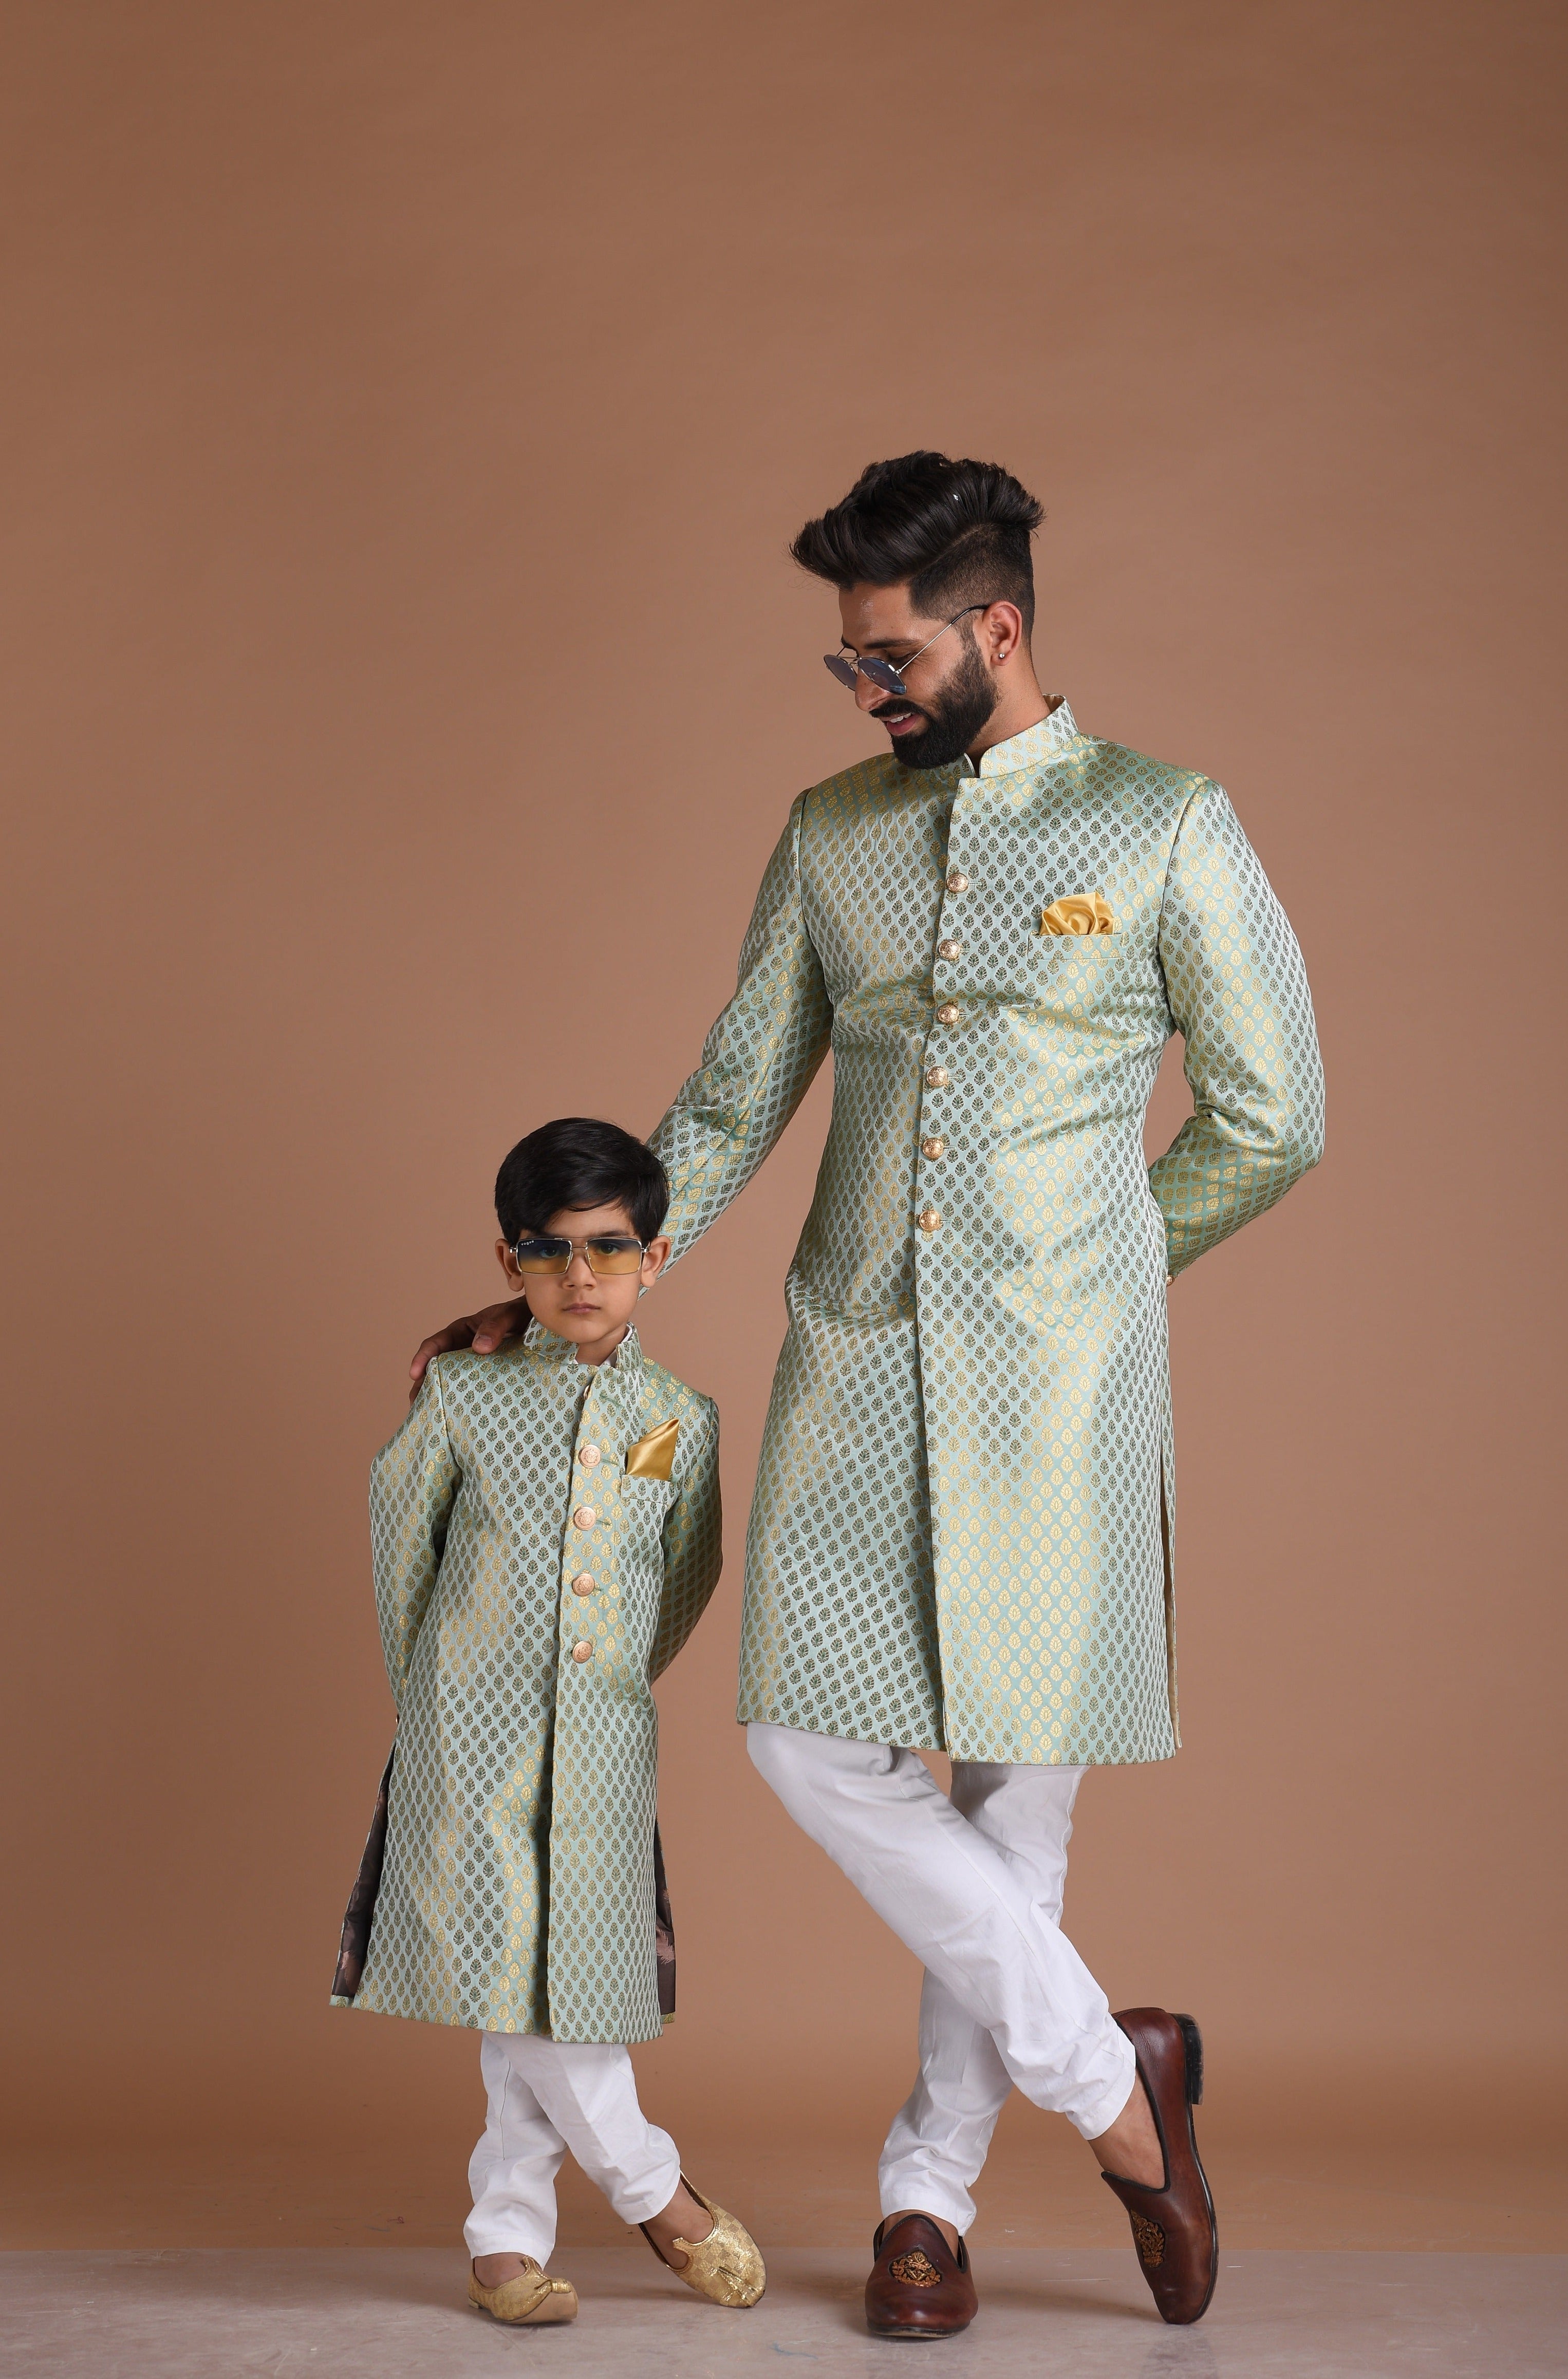 Sea Green Color Brocade Booti Pattern Achkan Best for Day functions and weddings | Available in Father Son Combo